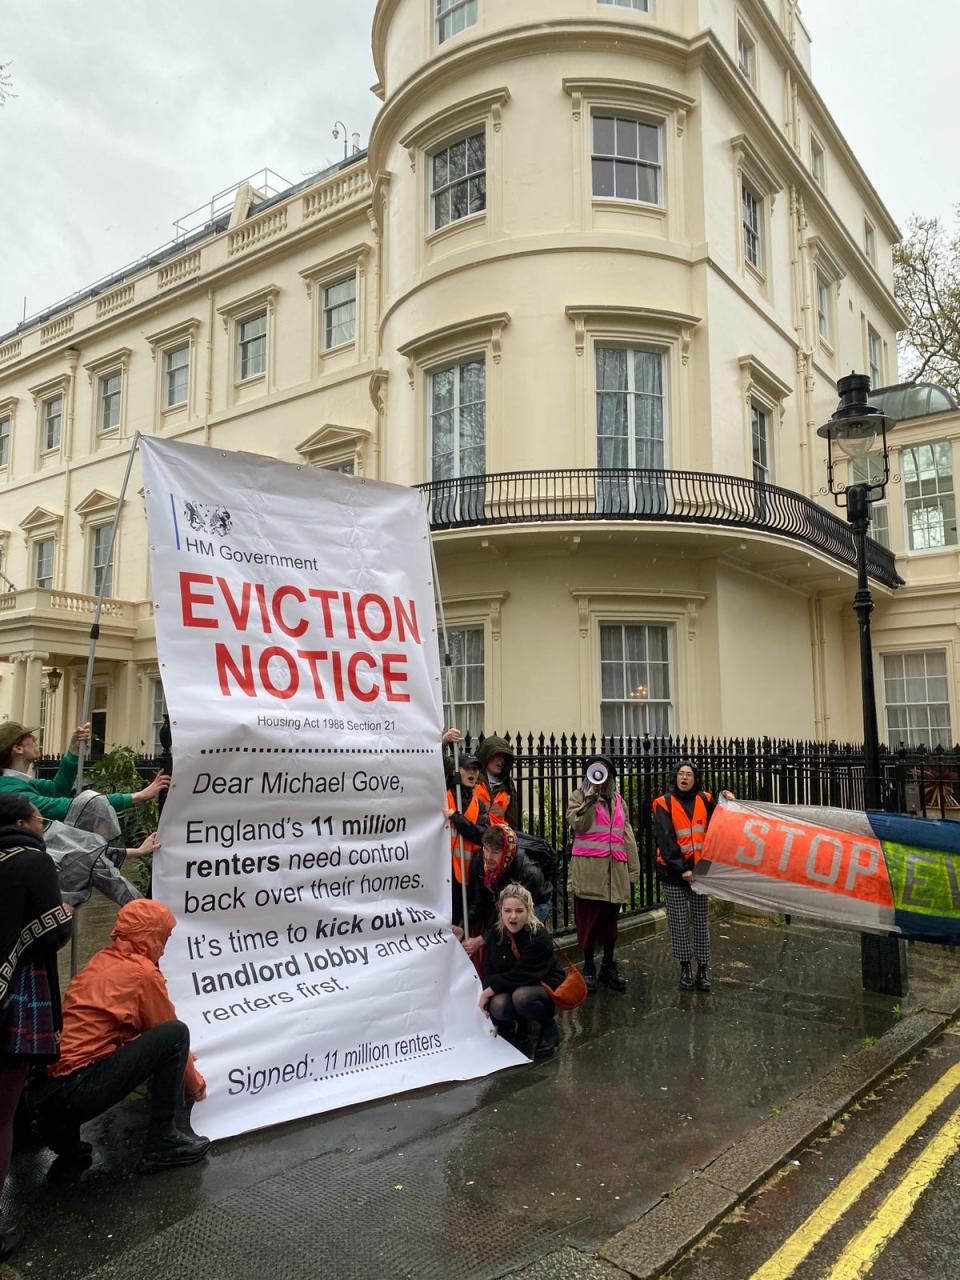 Gove has been granted the use of One Carlton Gardens (London Renters Union)